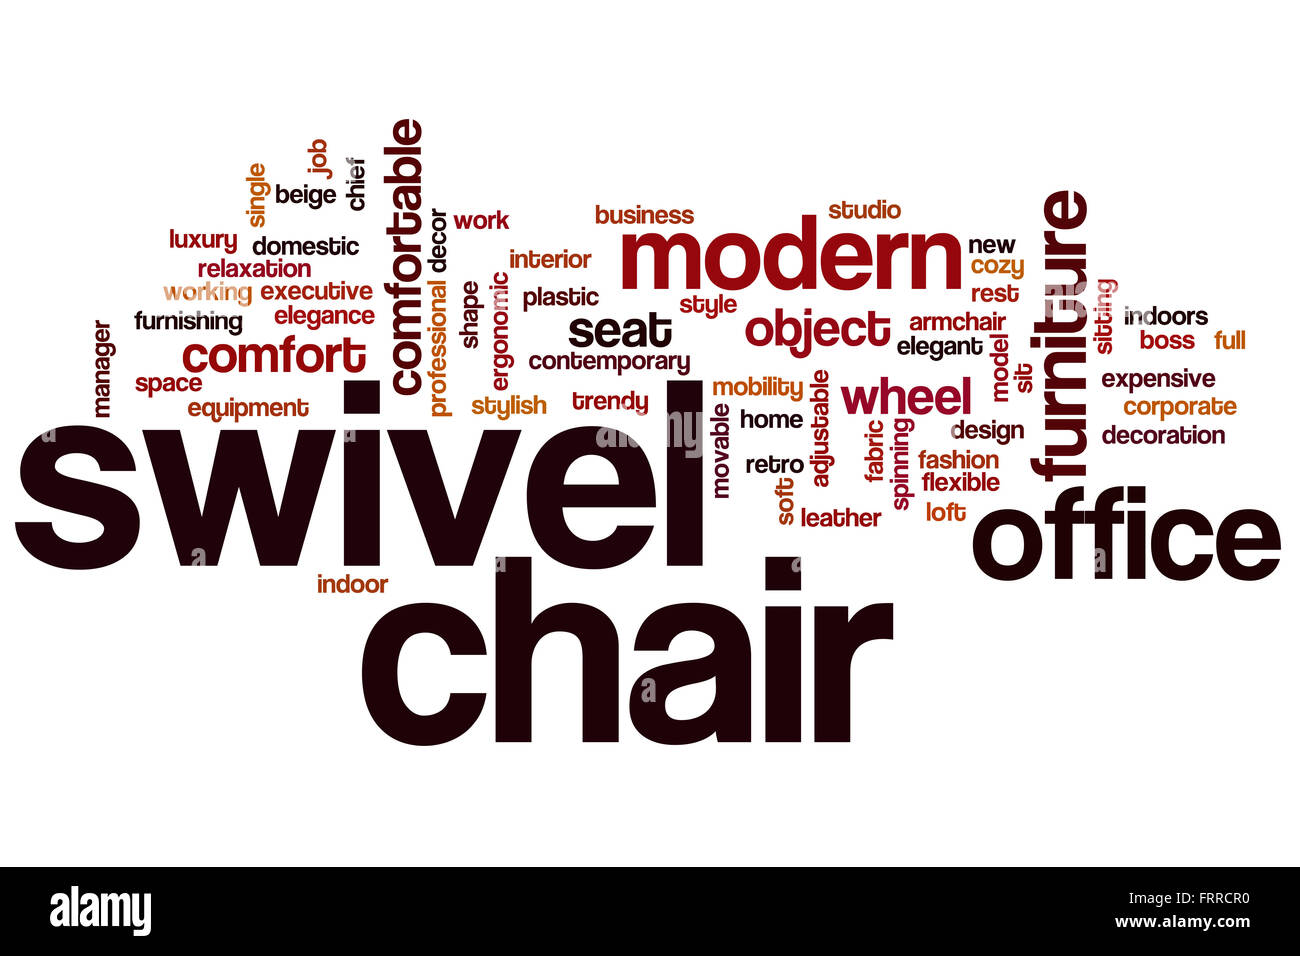 Swivel chair word cloud concept with furniture comfort related tags Stock Photo